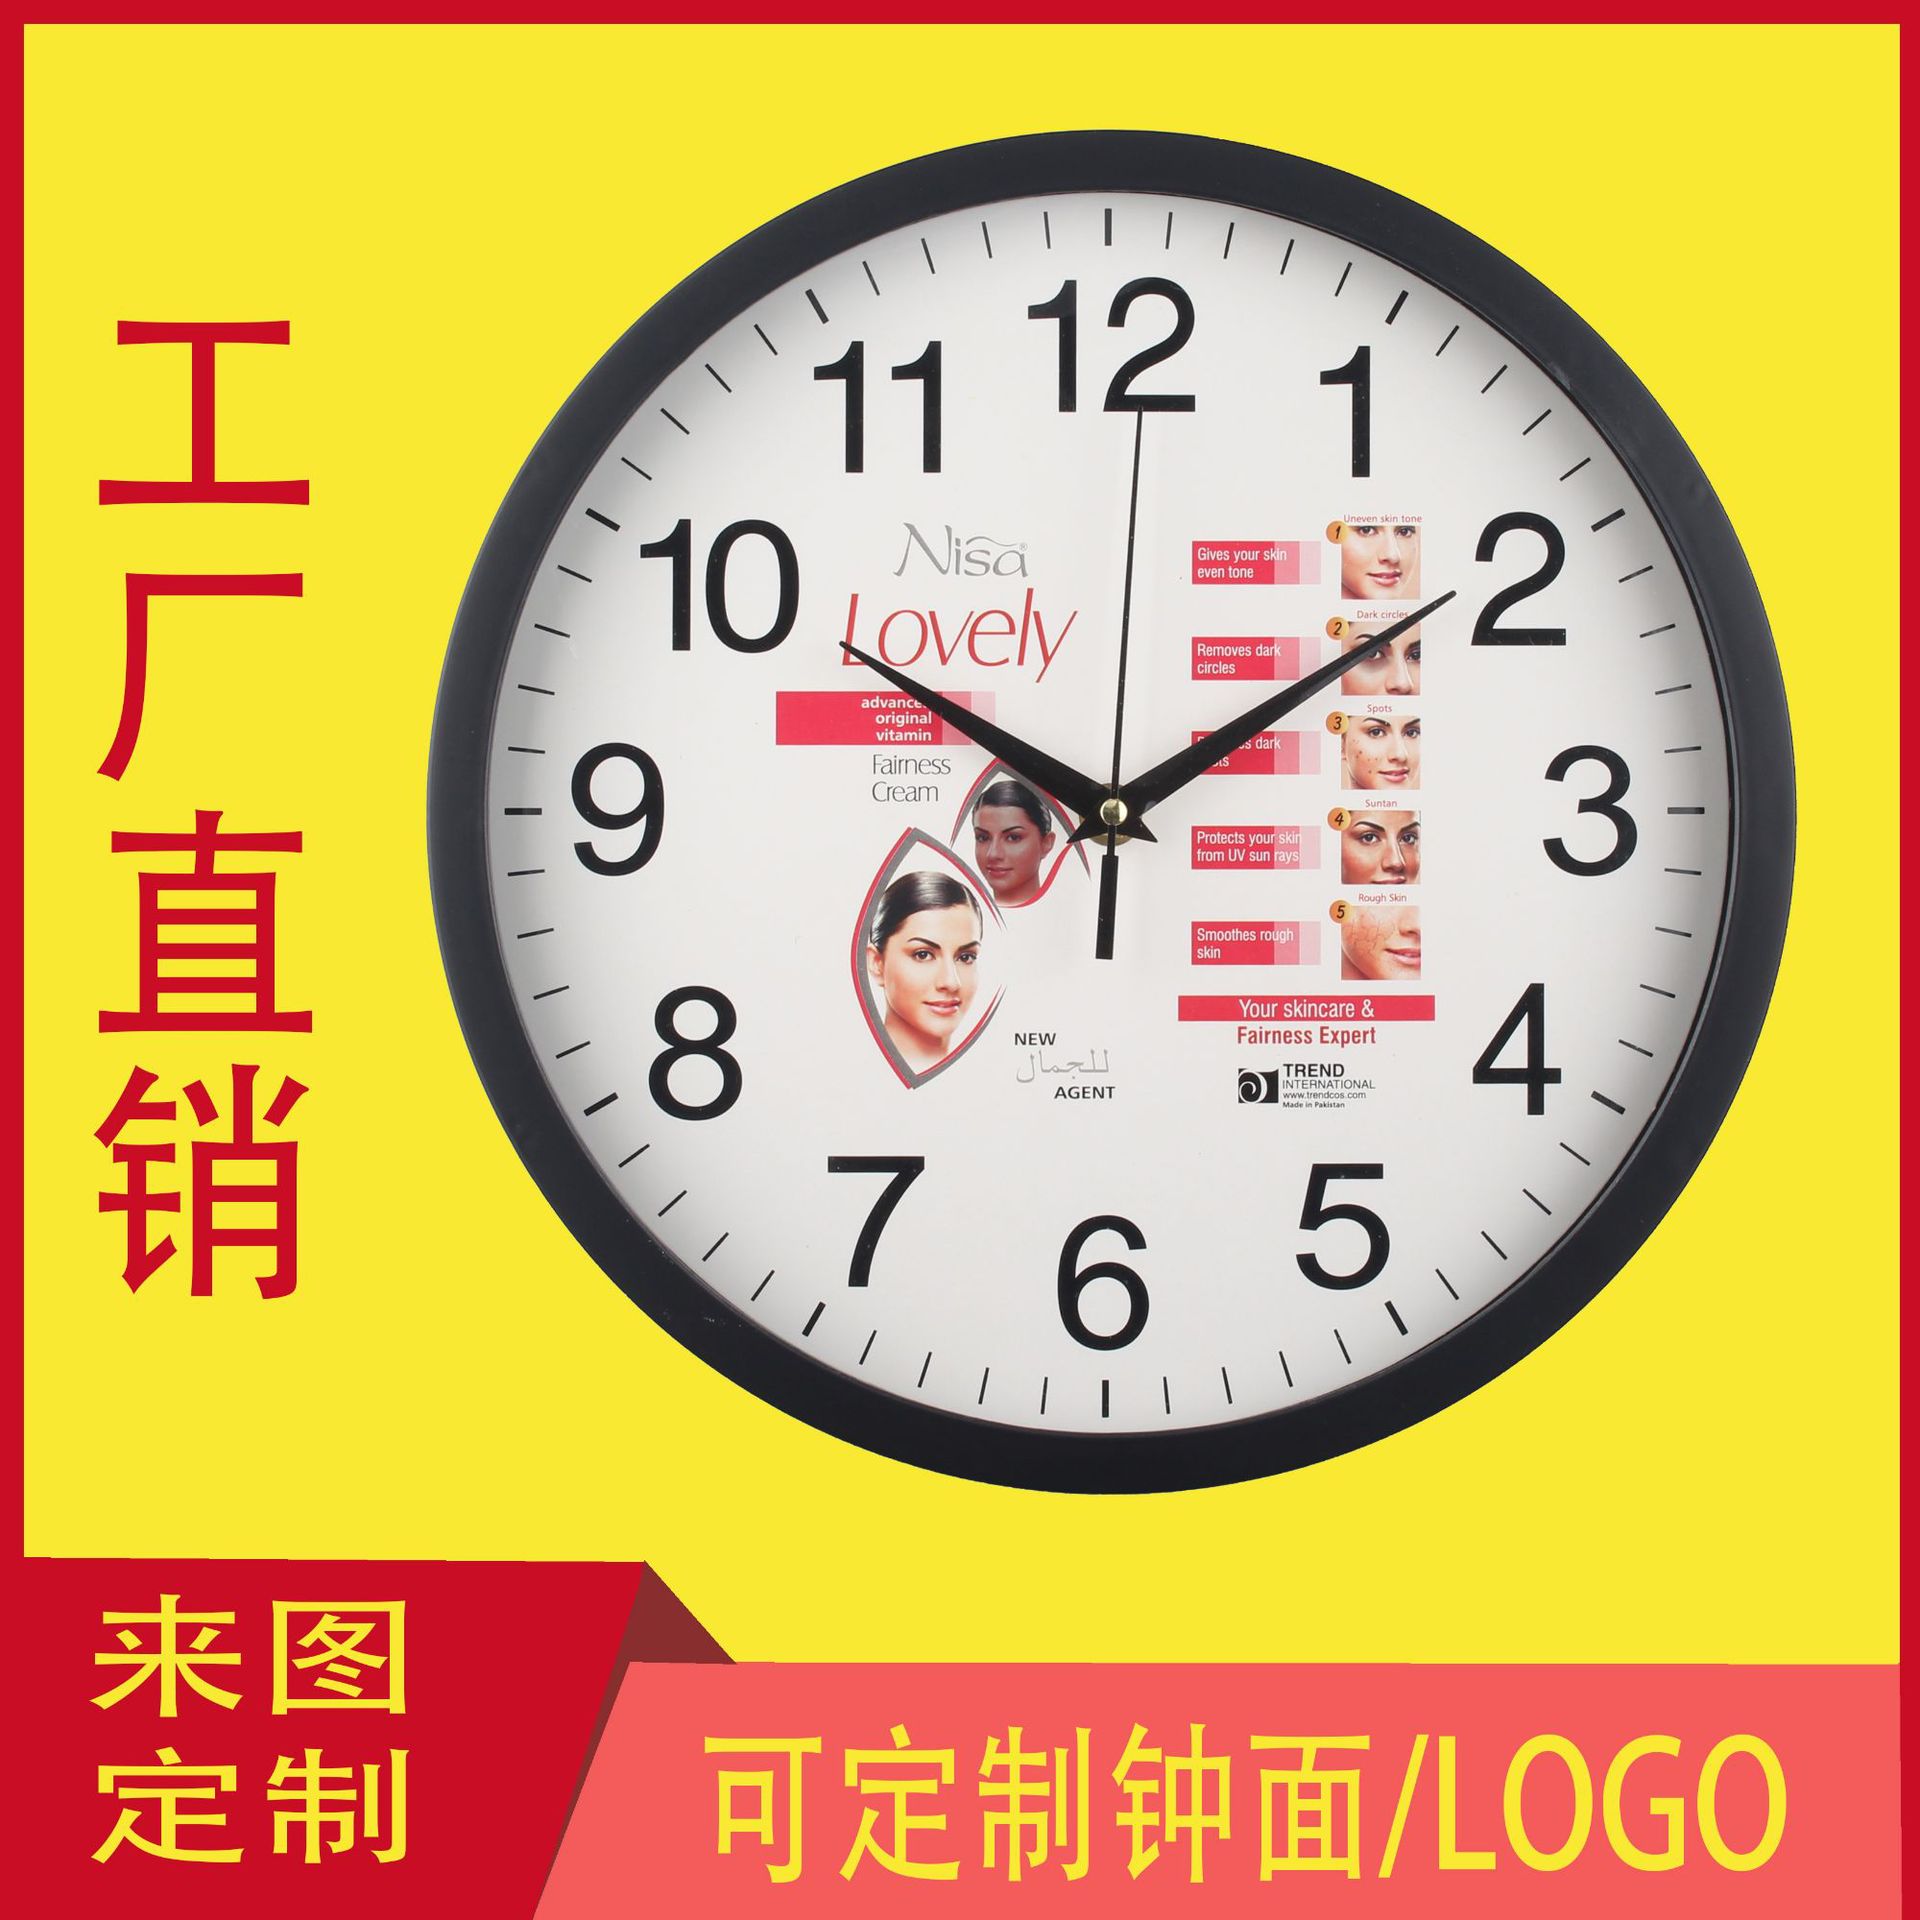 Customized Wall Clock Size Mirror Paper to Undertake Foreign Trade Orders Welcome to Consult the Original Factory to Make Pictures